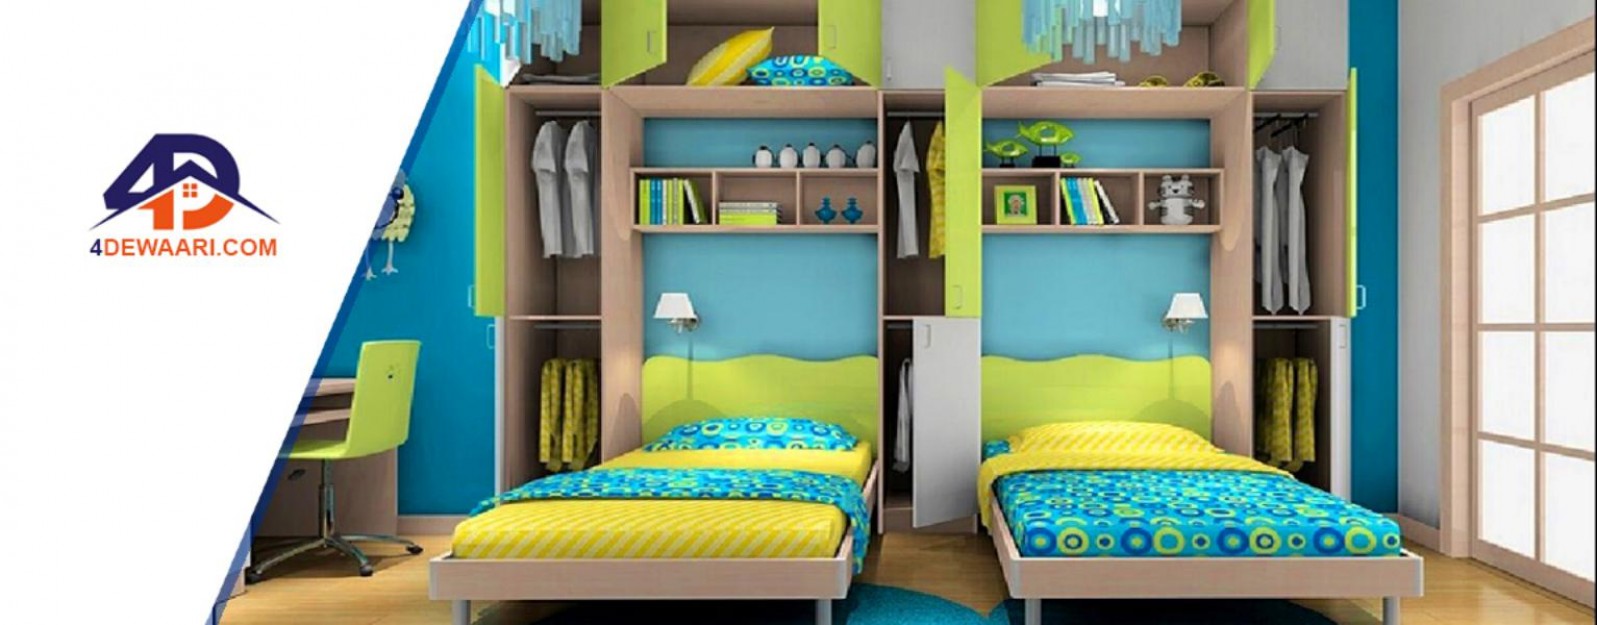 Most Popular Bed Designs for Kids Room Boy and Girls